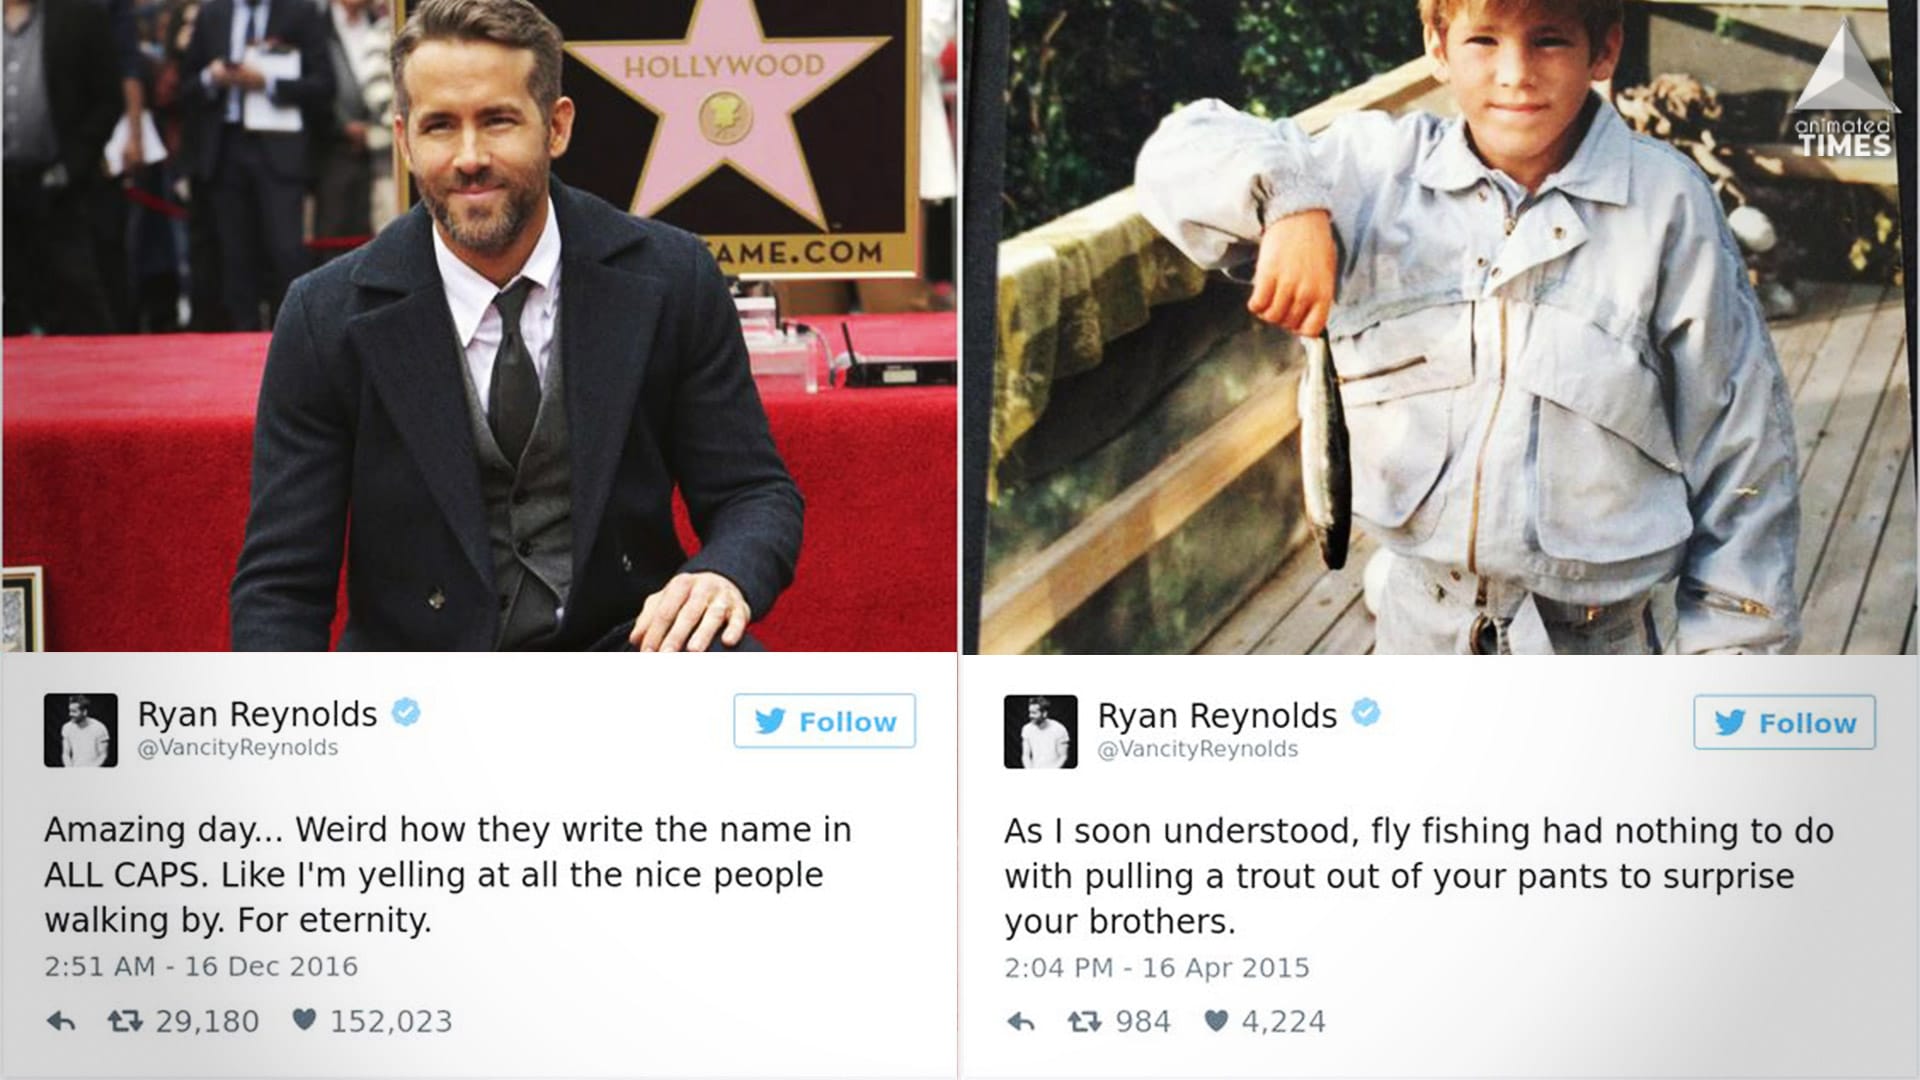 10 Of The Best Ryan Reynolds Quotes Over The Internet That Makes Him Everyone’s Favorite Superhero